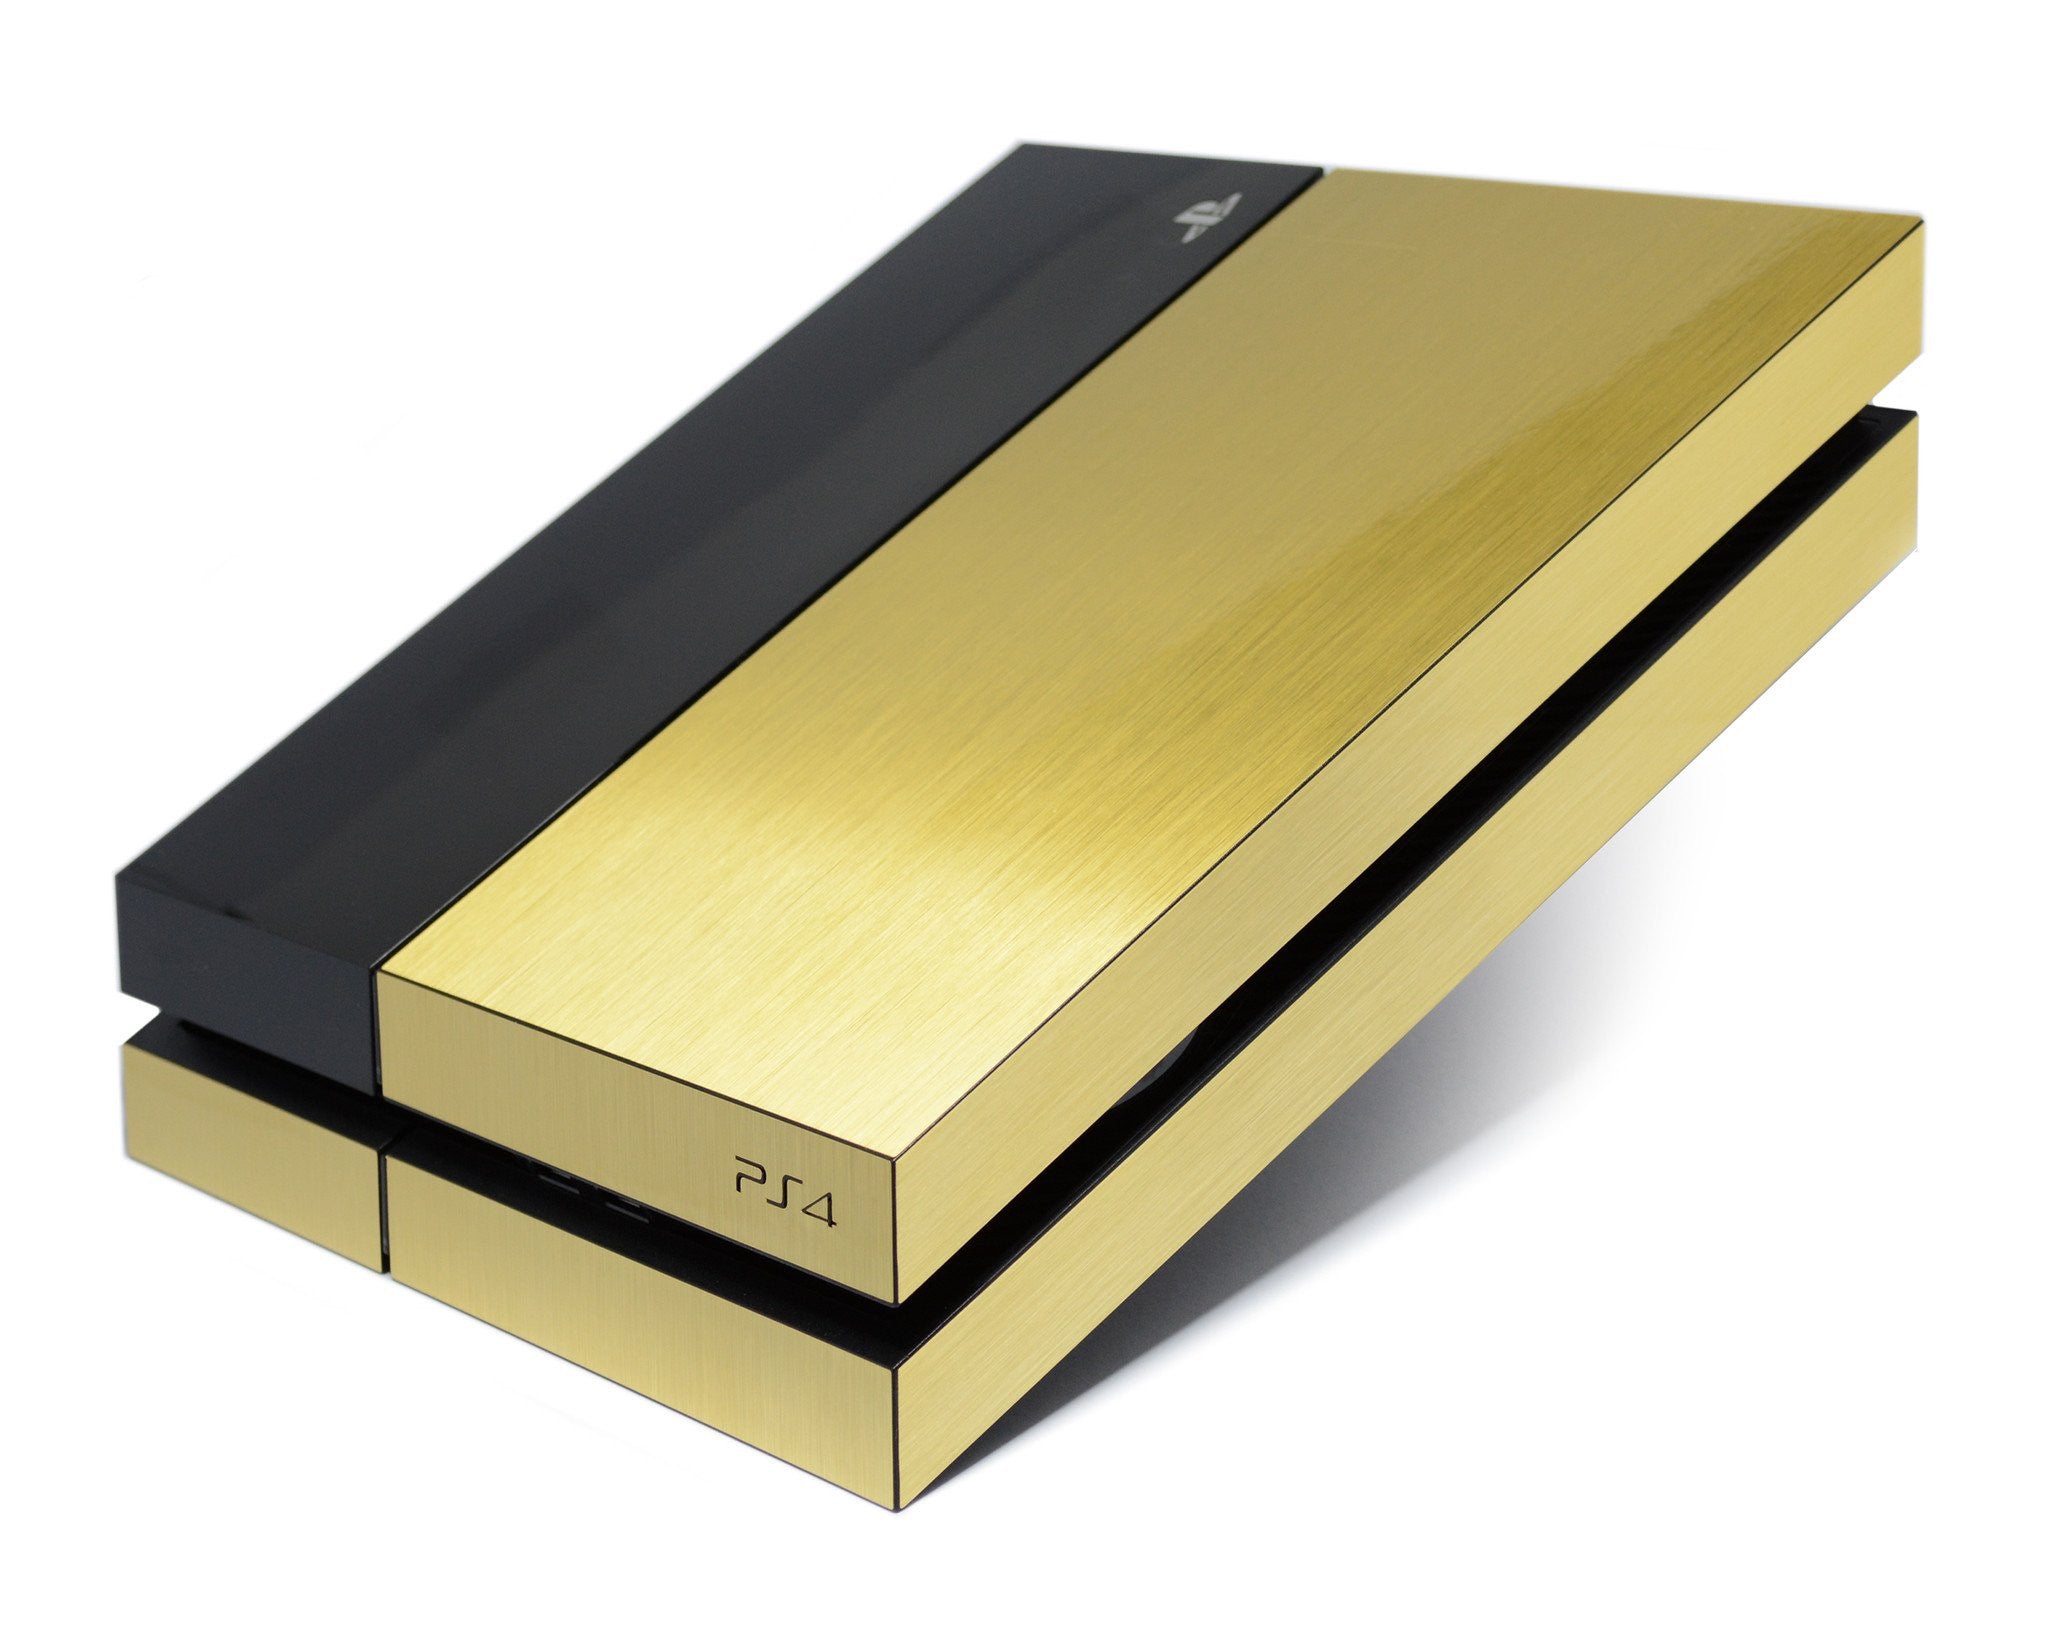 Playstation 4 (PS4) GOLD real metal skin / cover